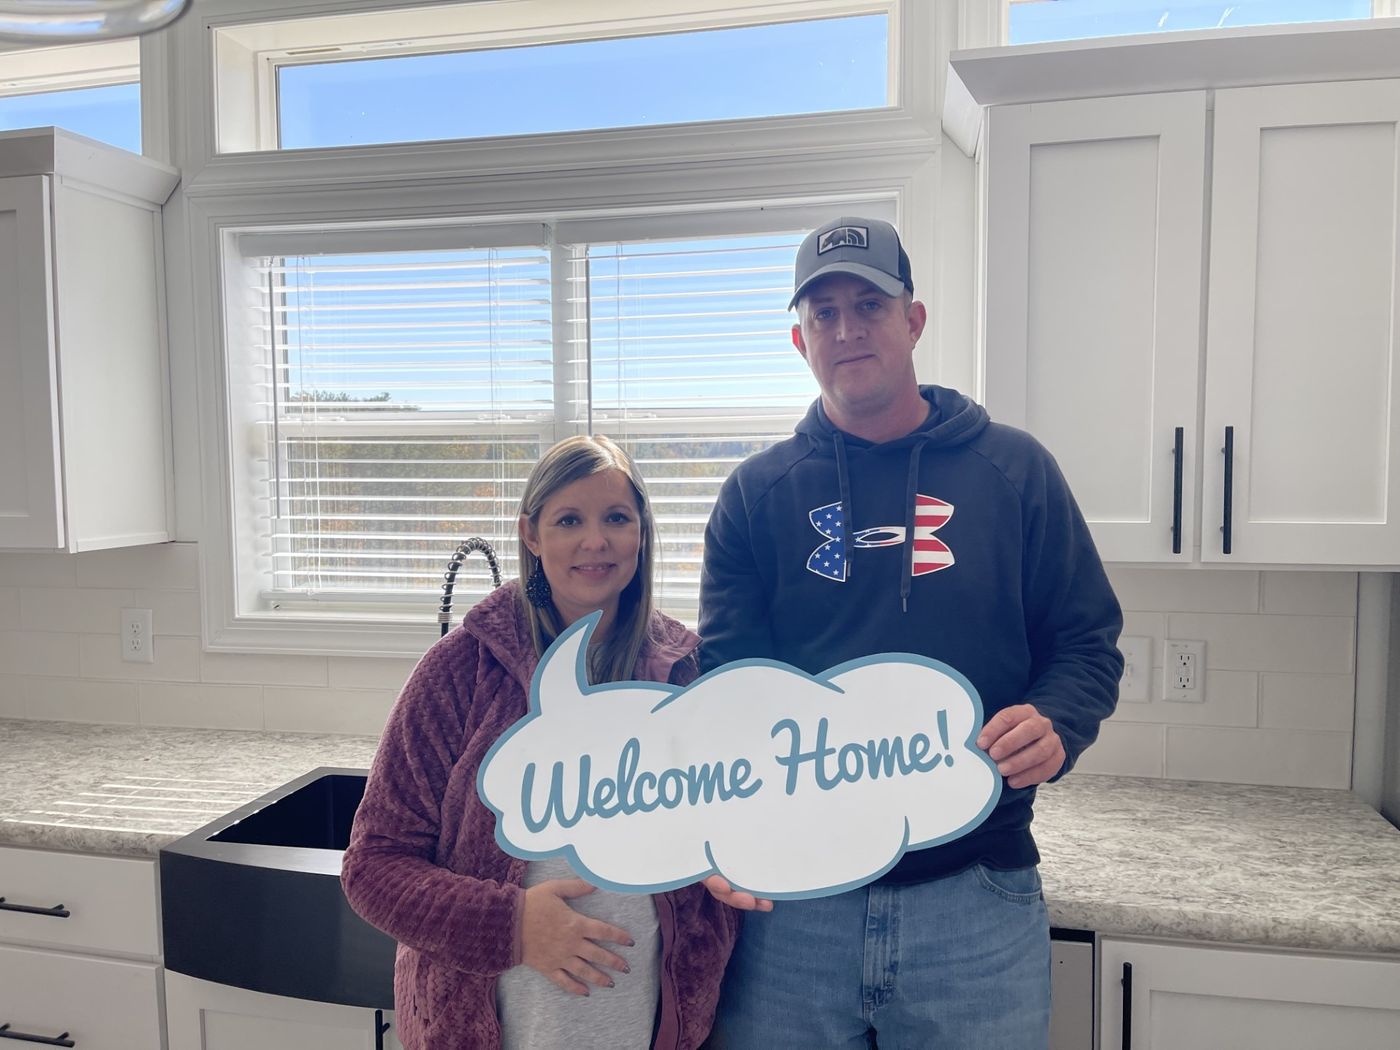 HANNAH D. welcome home image